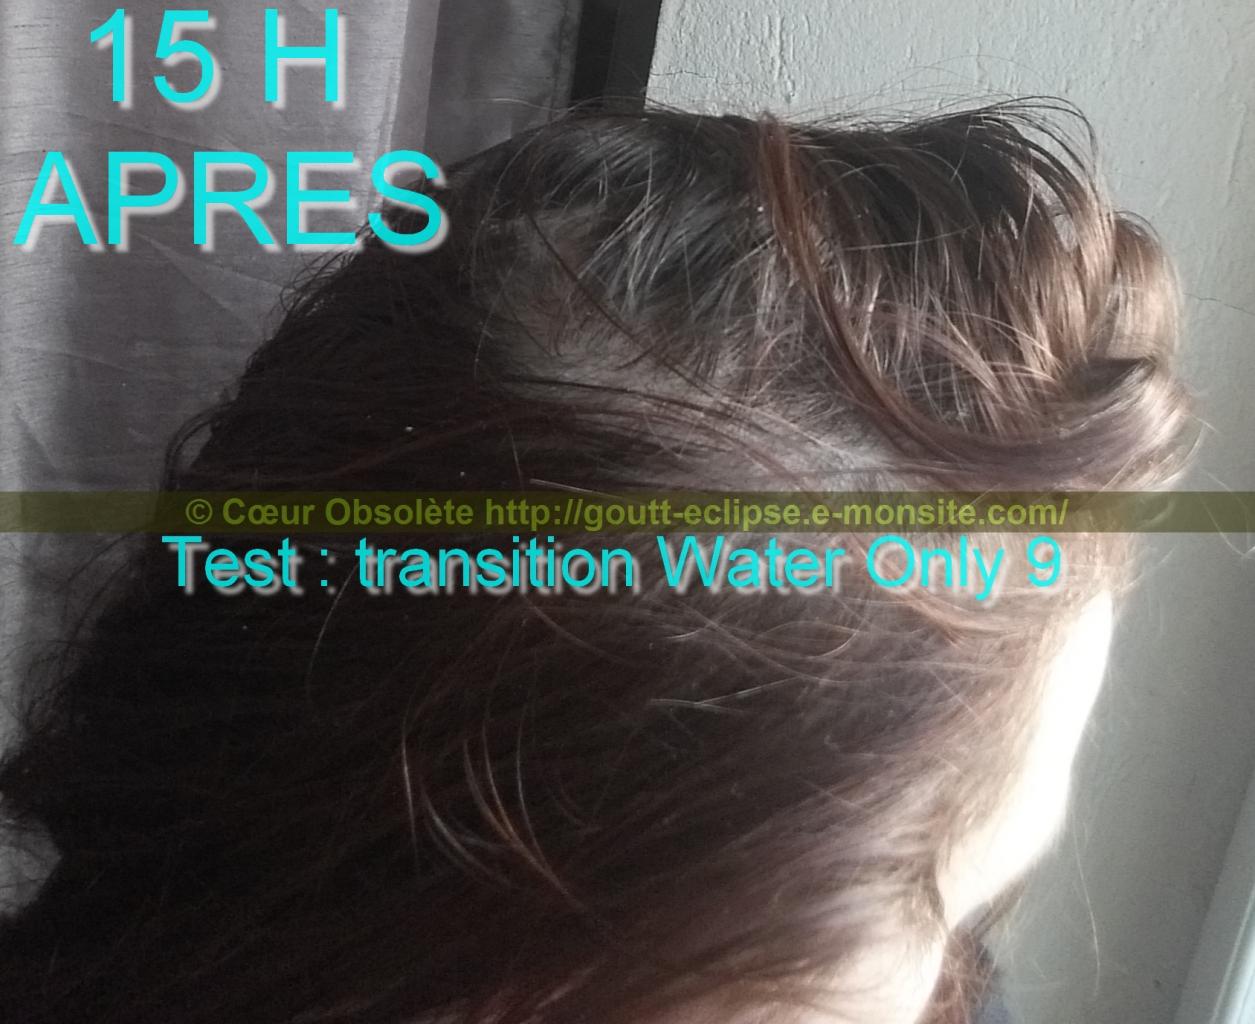 04 Fév 2018 Test Water Only Transition lavage N°9 photo 10